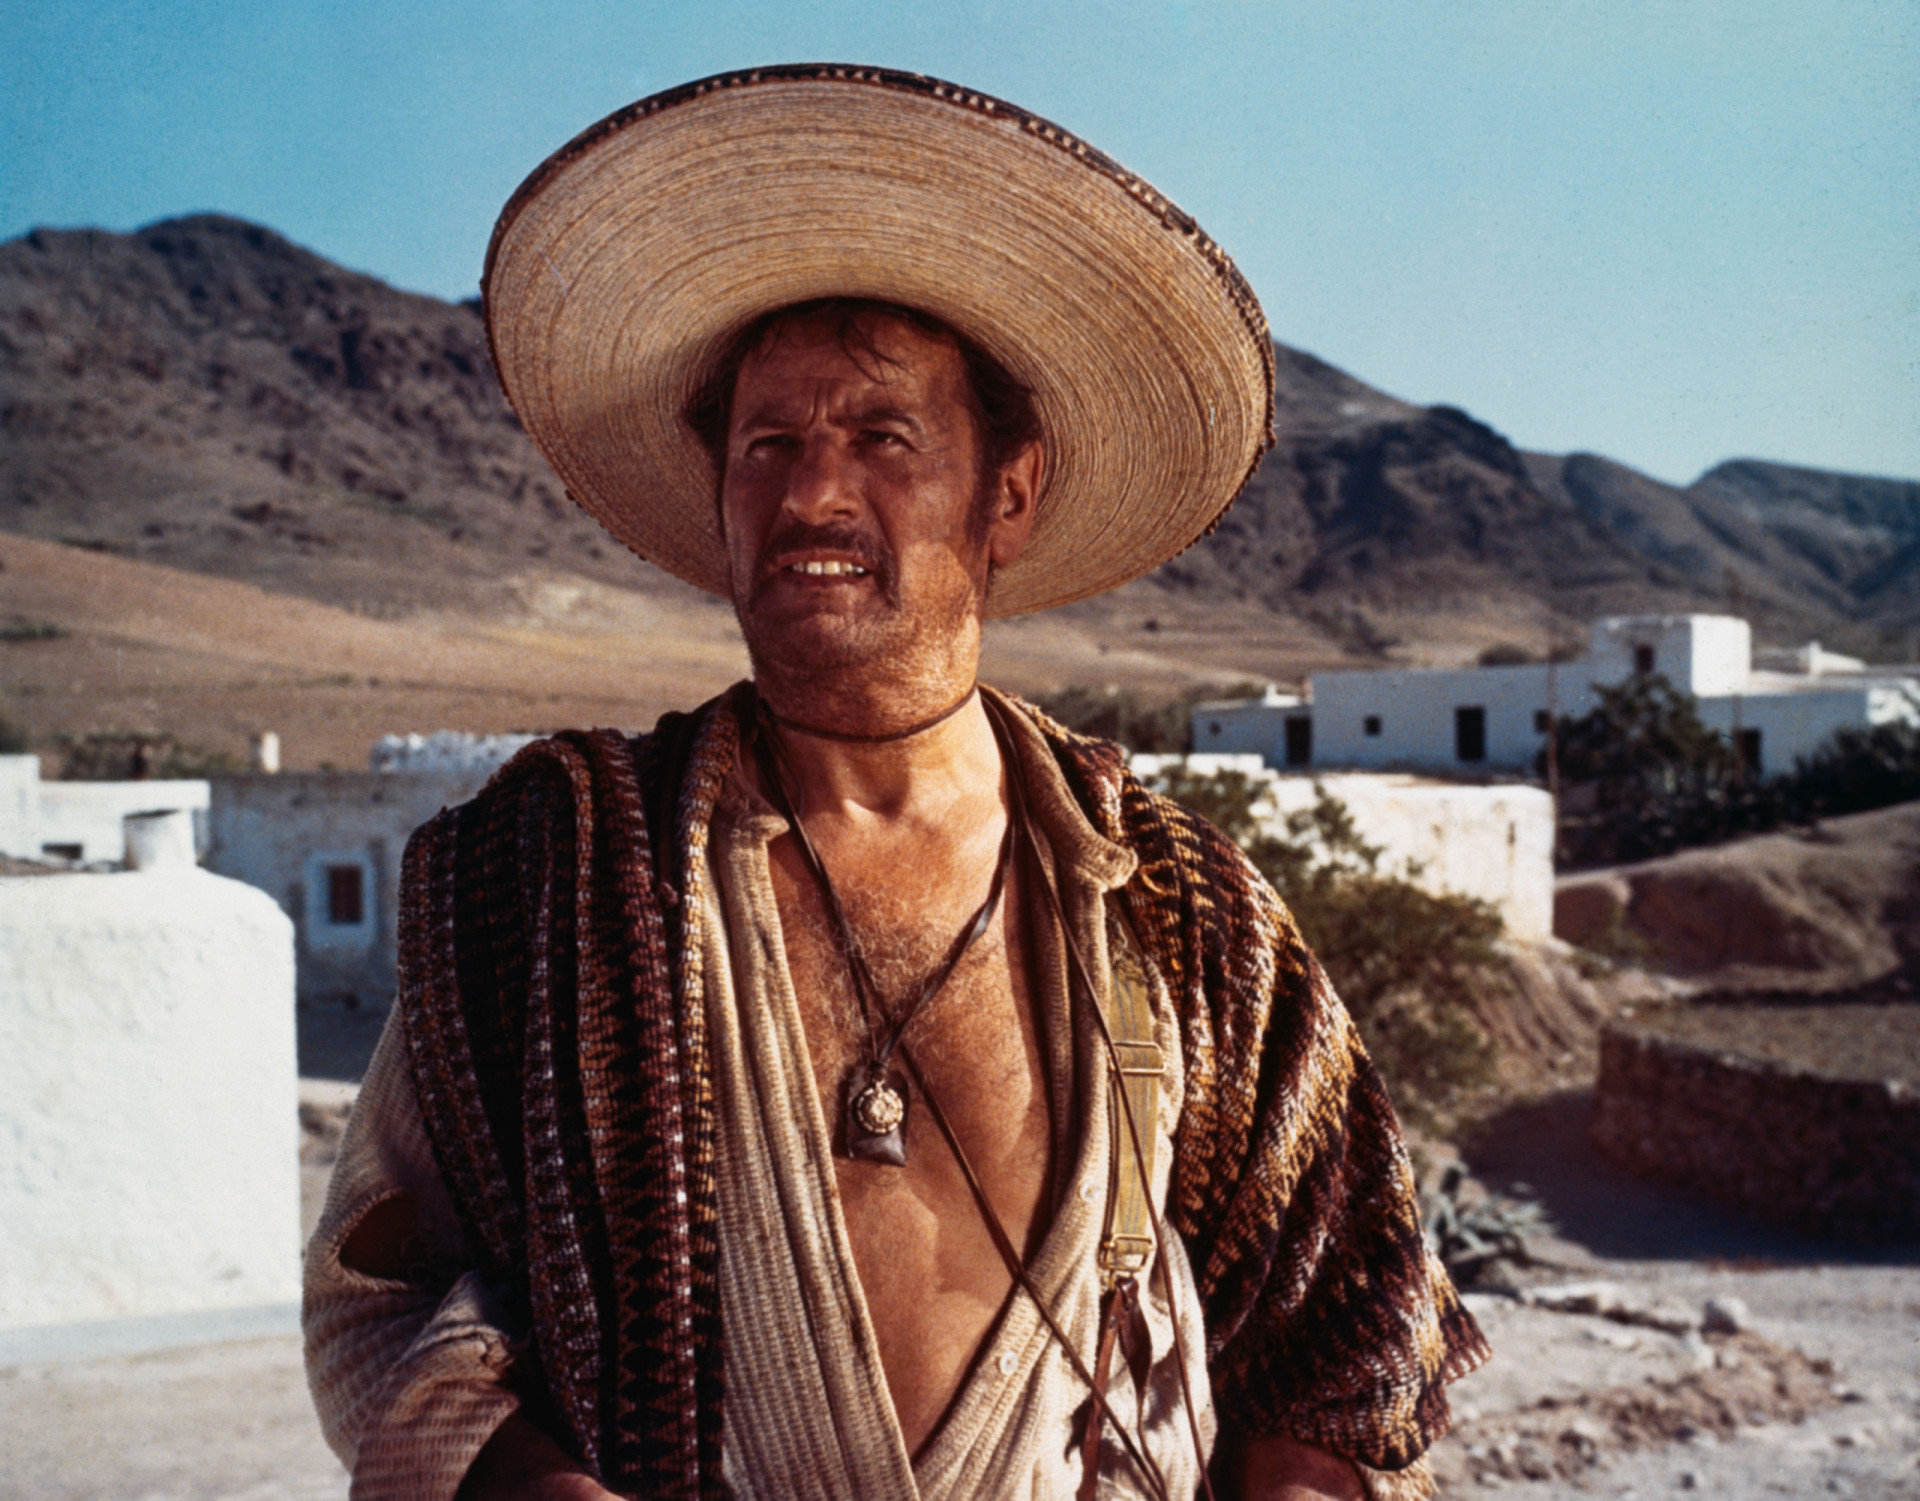 <p>In 1966, Sergio Leone returned to Tabernas to shoot the epic 'The Good, the Bad, and the Ugly.'</p><p><a href="https://www.msn.com/en-us/community/channel/vid-7xx8mnucu55yw63we9va2gwr7uihbxwc68fxqp25x6tg4ftibpra?cvid=94631541bc0f4f89bfd59158d696ad7e">Follow us and access great exclusive content every day</a></p>